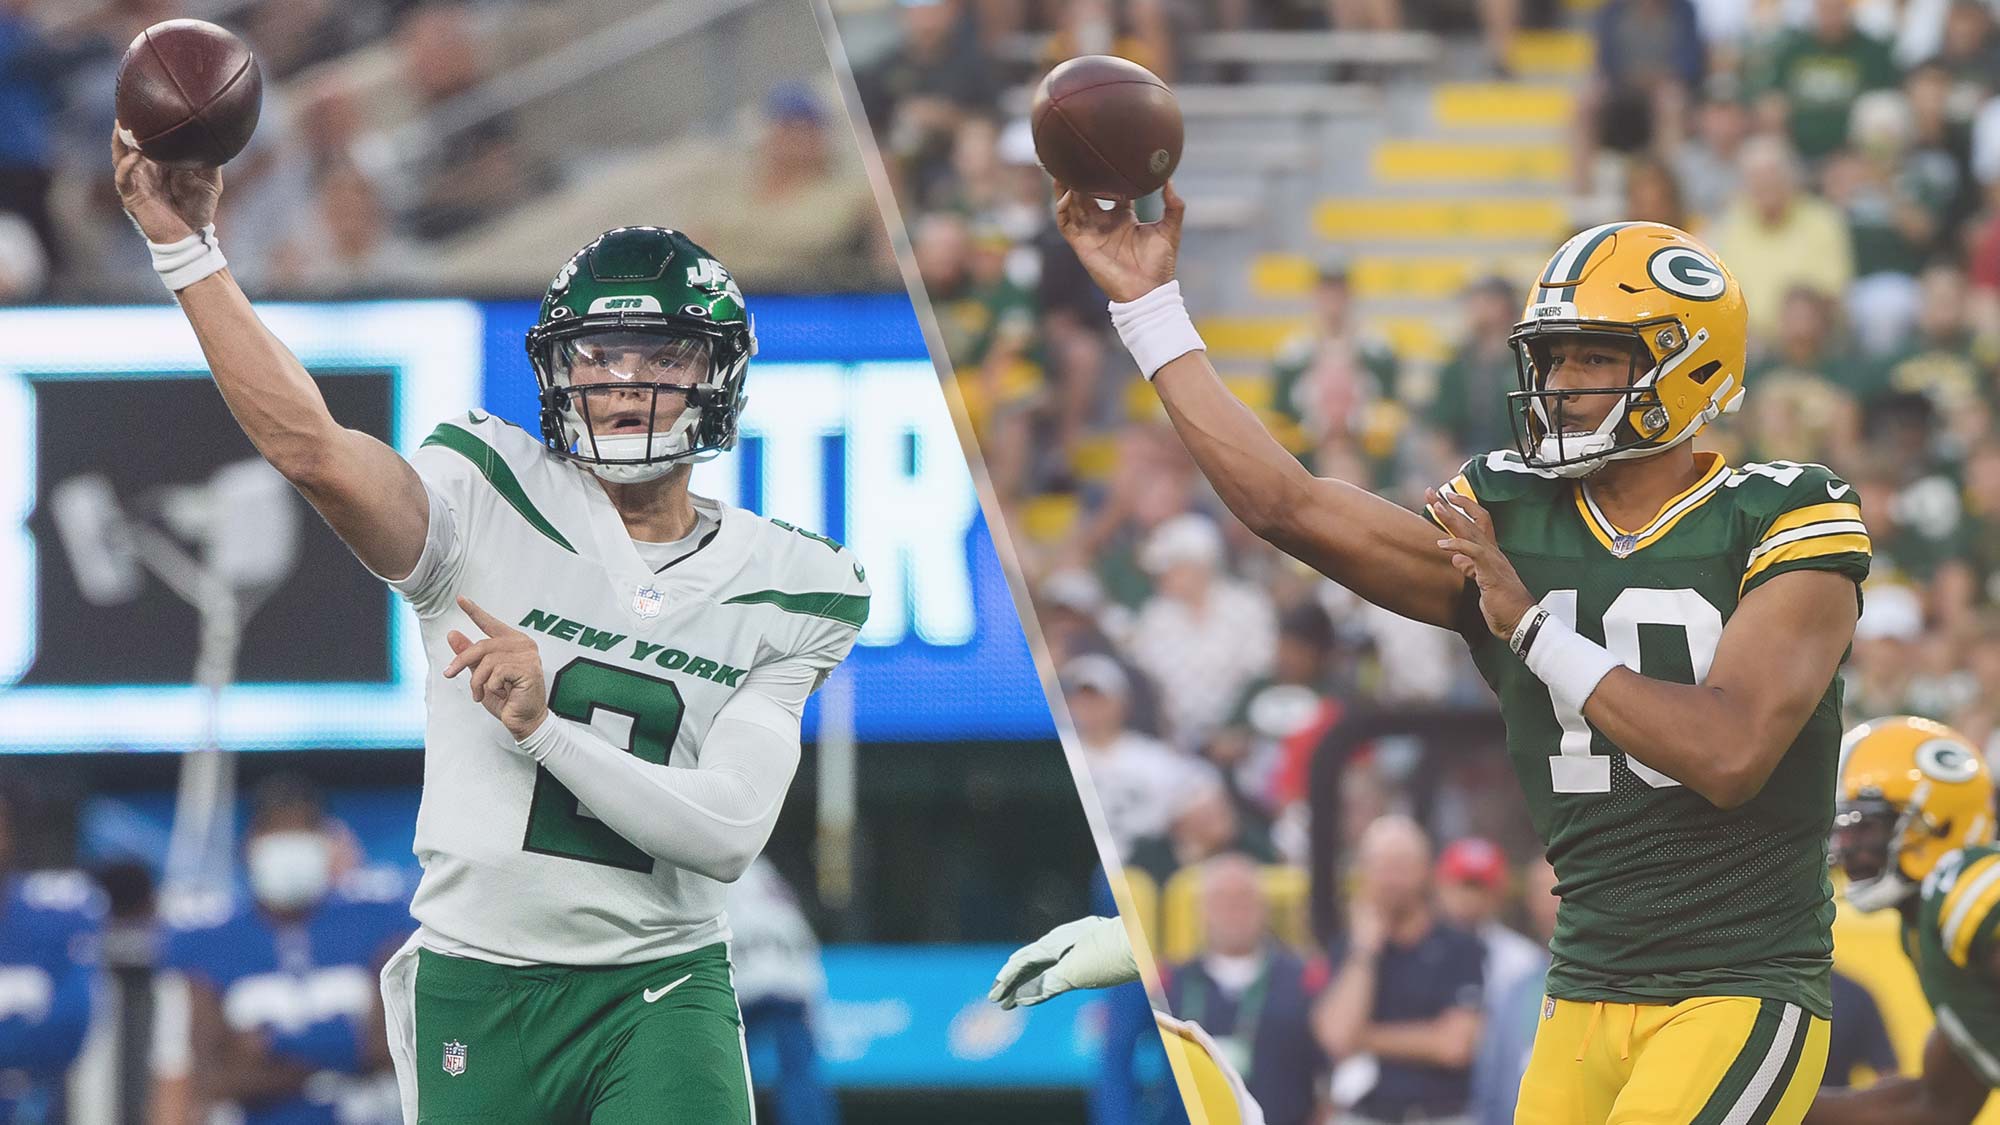 Jets vs Packers live stream: How to watch 2021 NFL preseason game online